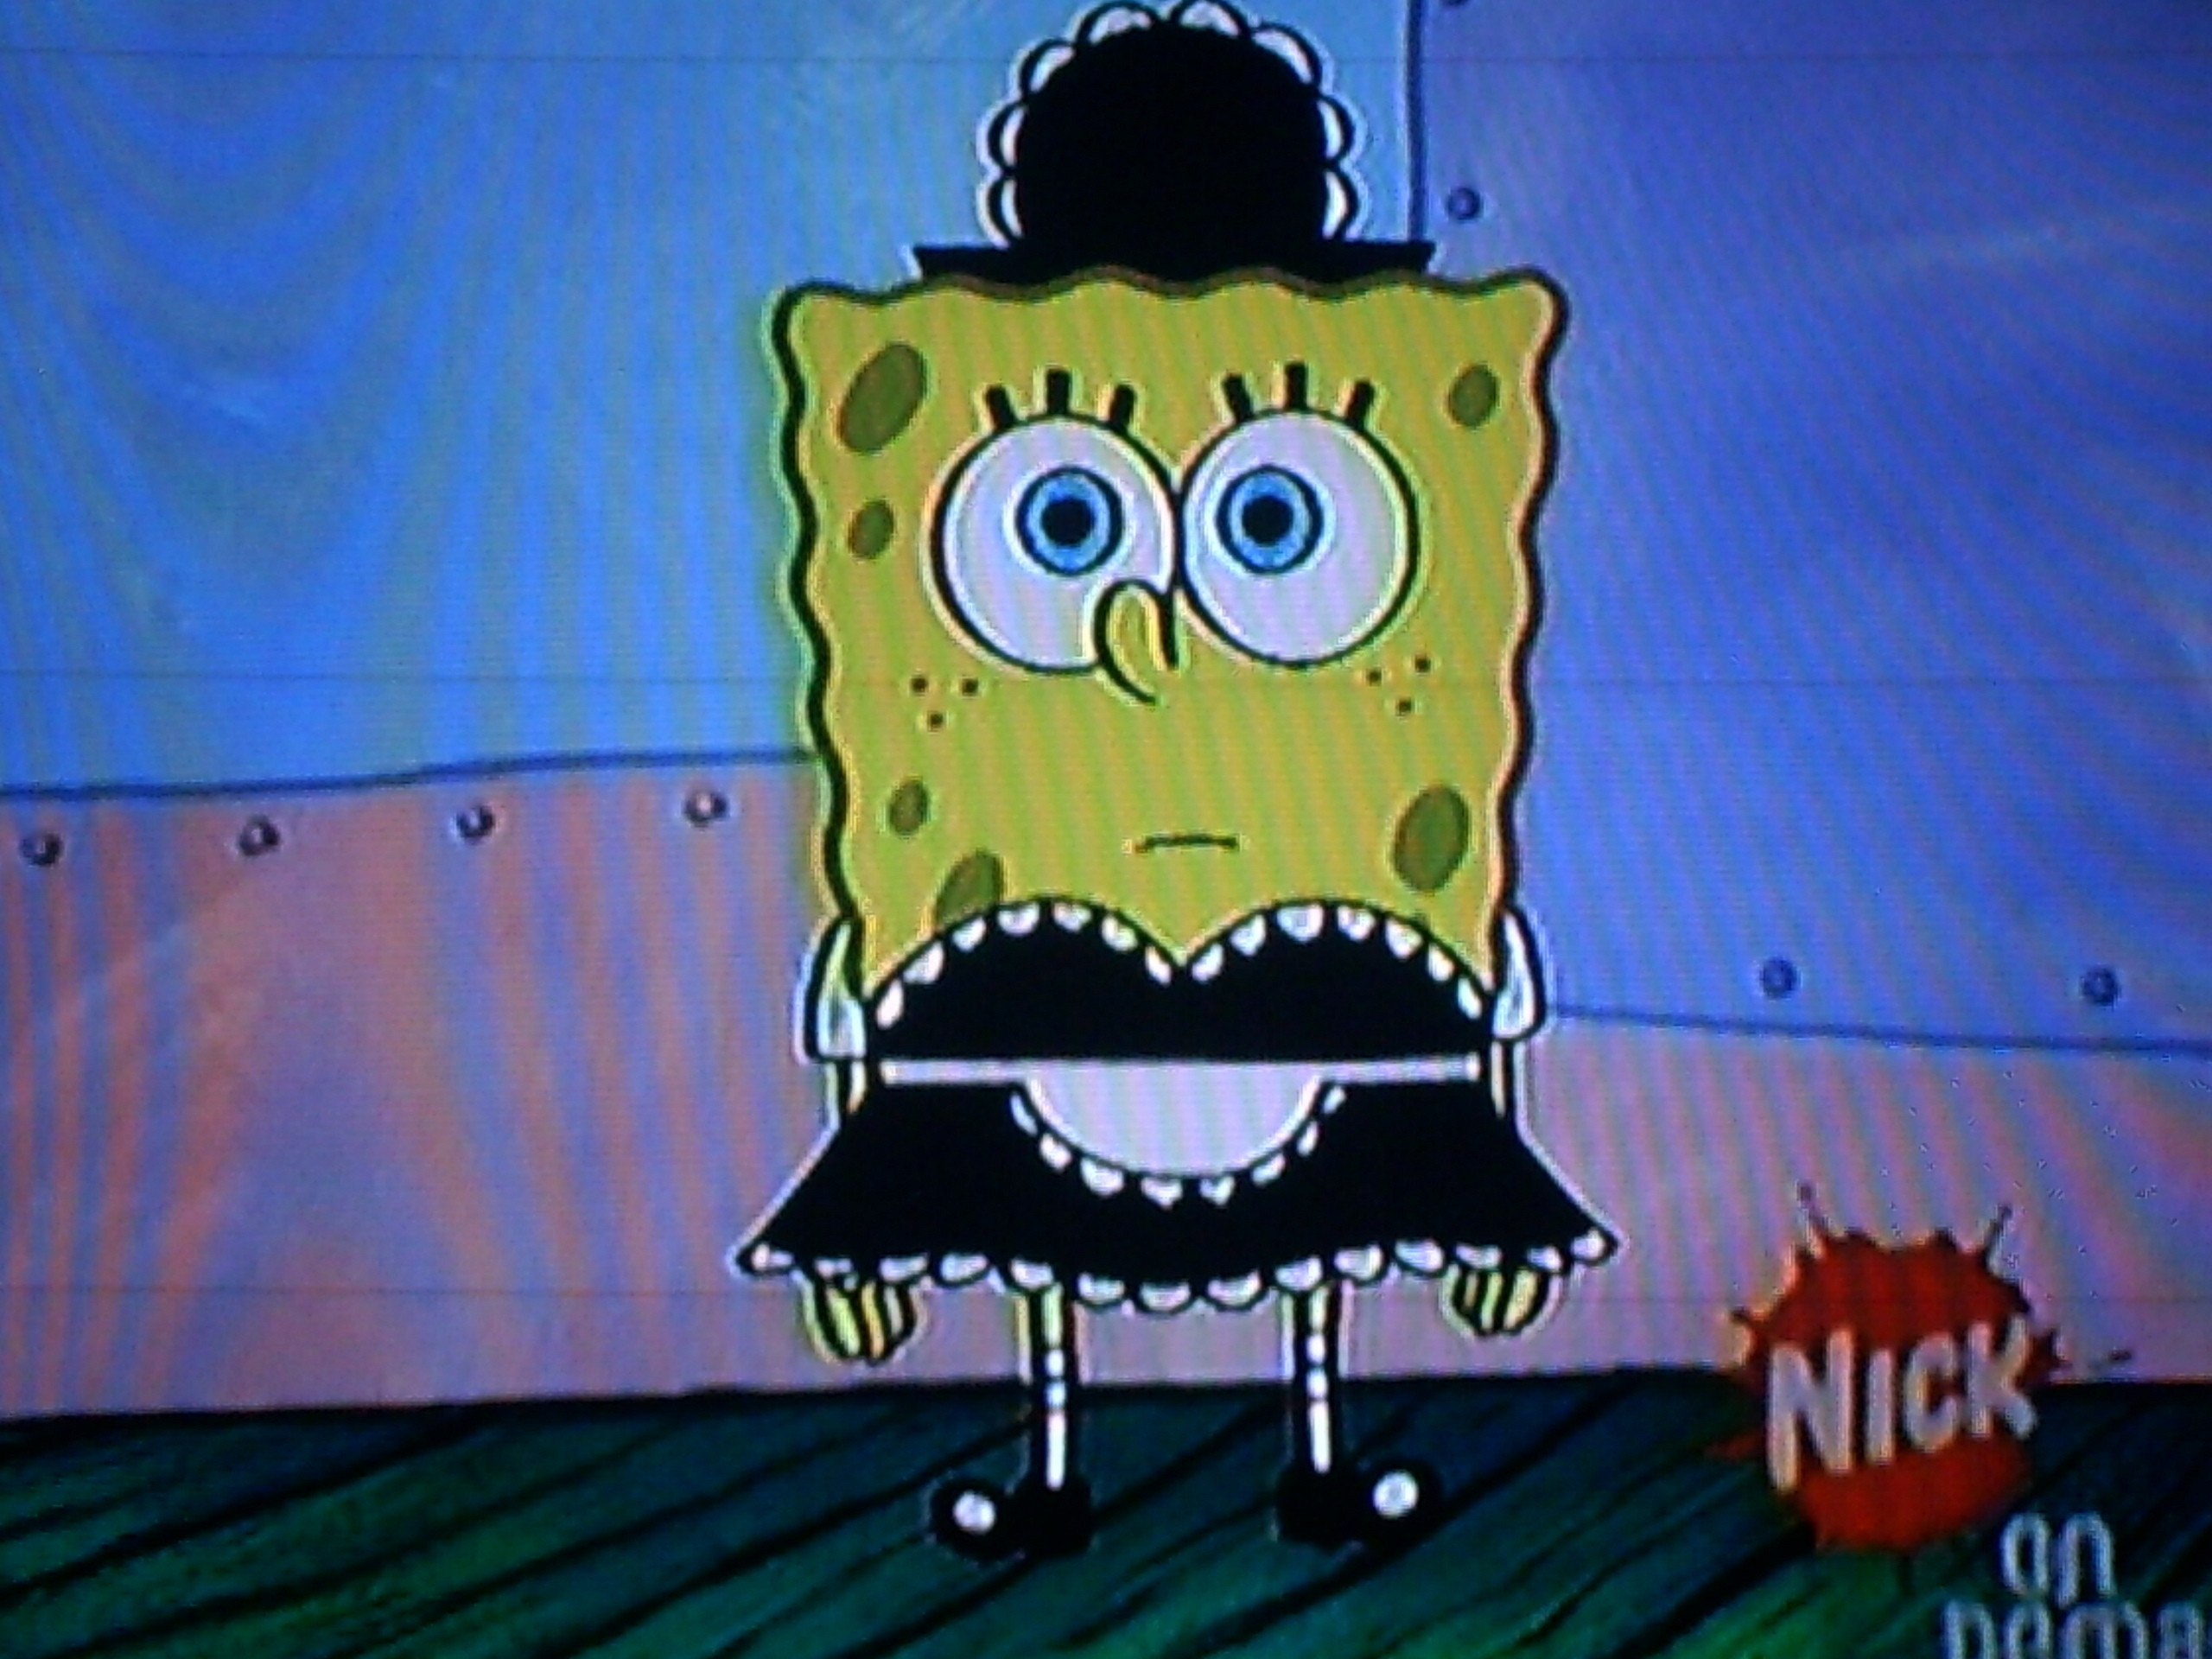 2560x1920 Spongebob Squarepants images Spongebob in a maids outfit! HD wallpaper and  background photos